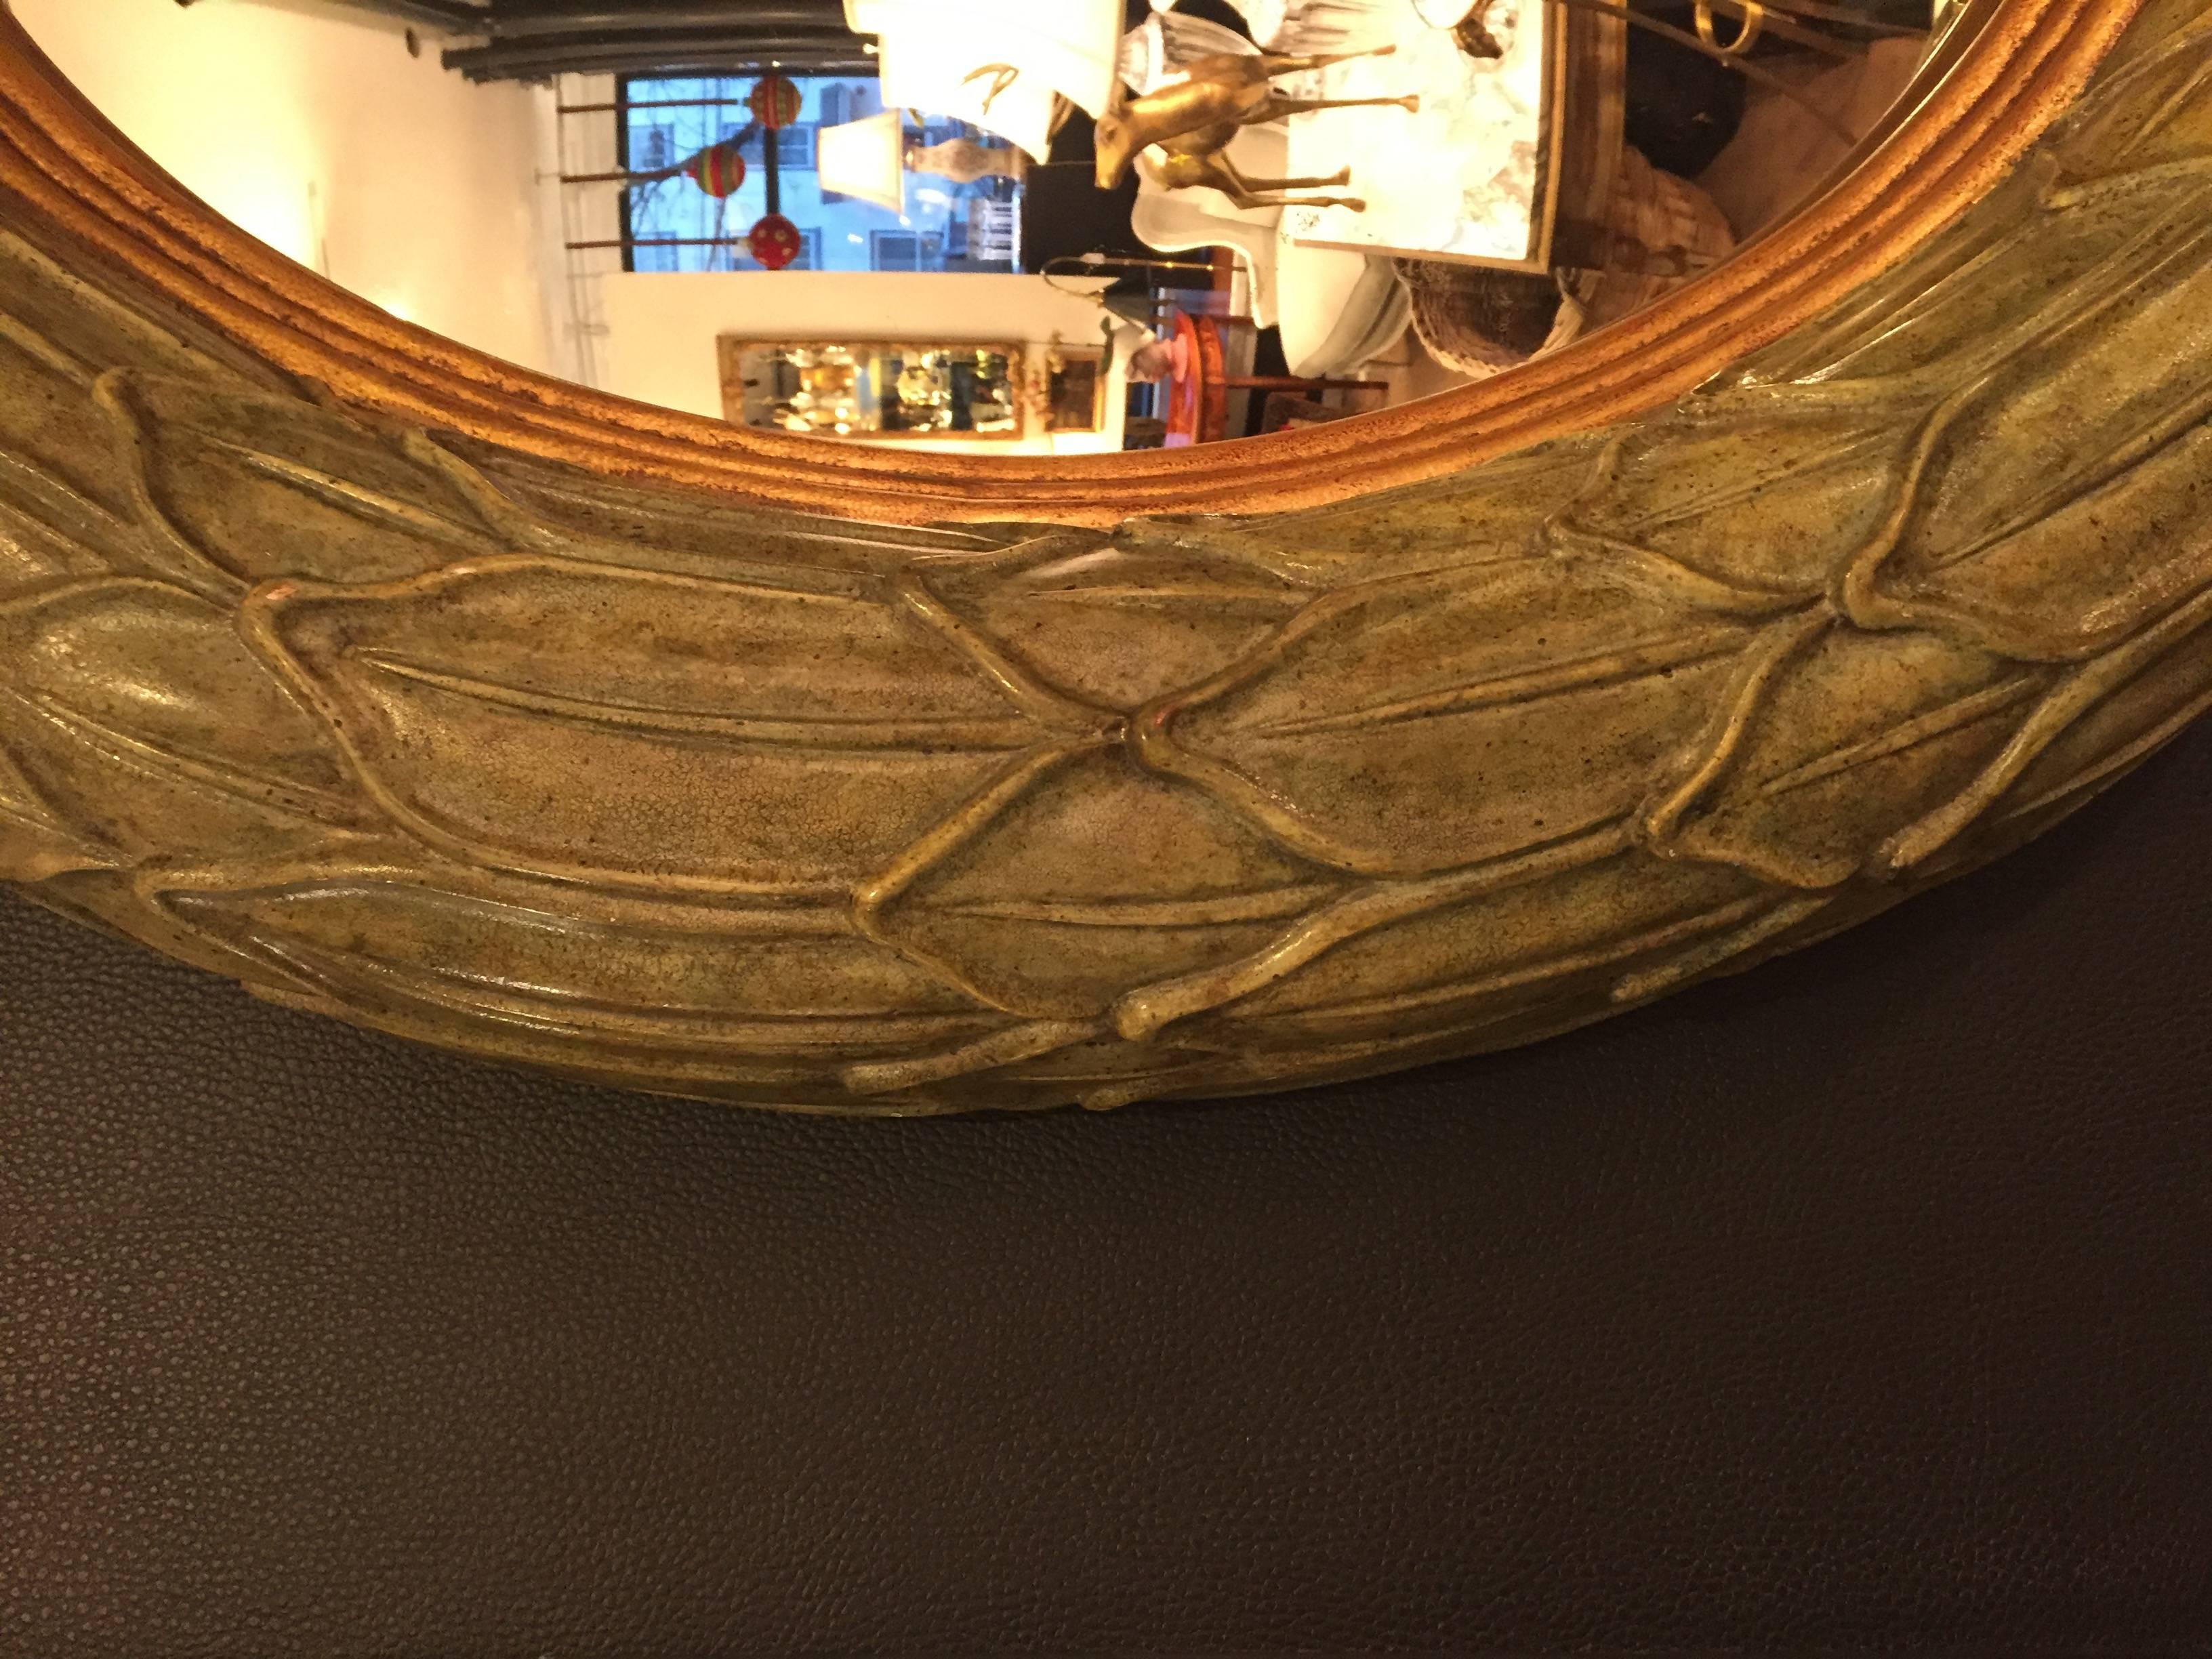 Chic round mirror having a light green painted carved wood frame with gold leaf detailing surrounded a convex shaped mirror.